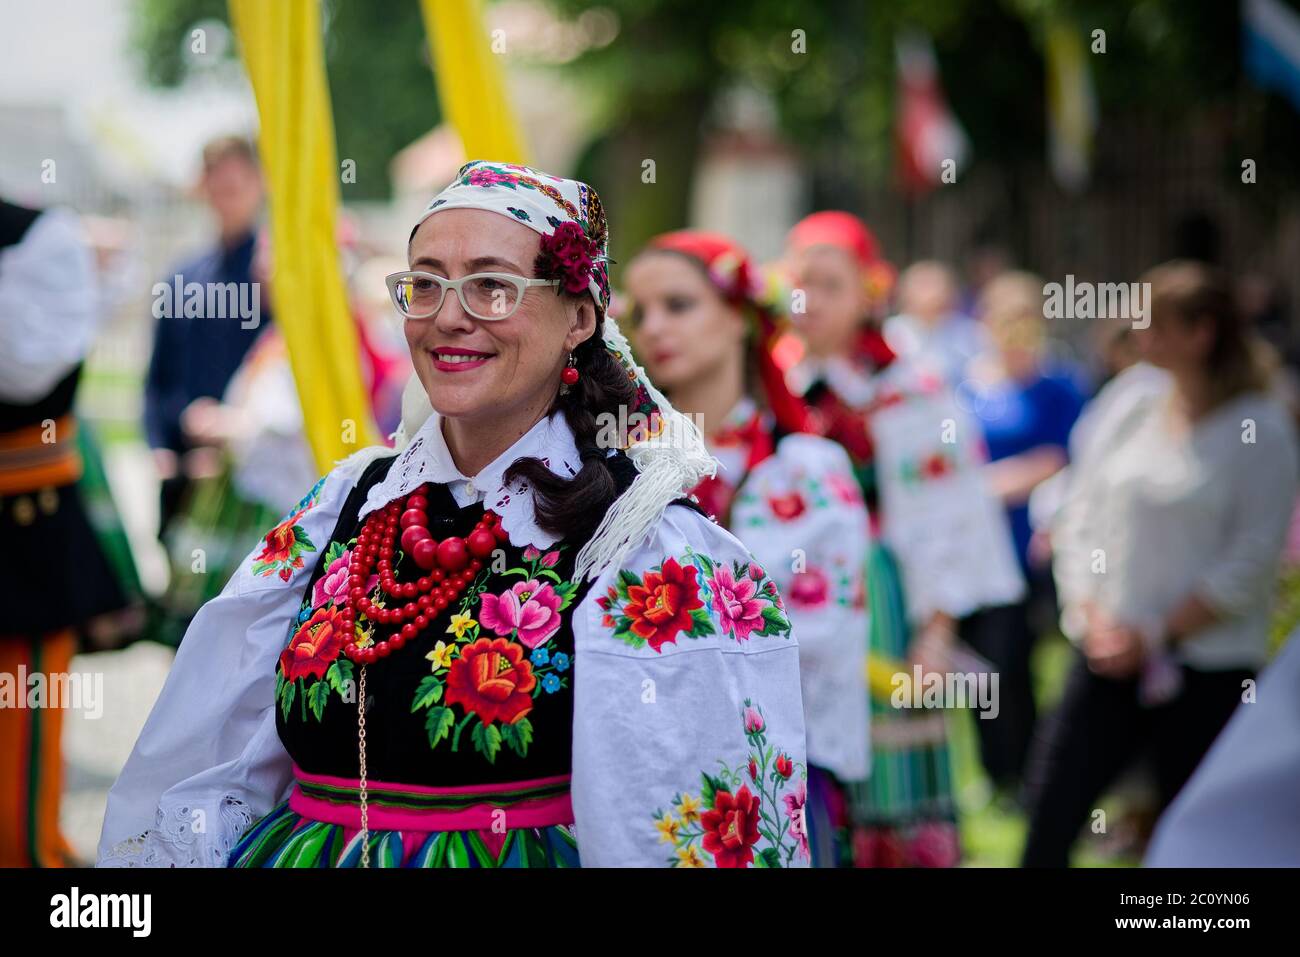 Lowicz, Poland - June 11 2020: An unidentified polish woman wearing traditional folk Lowicz national costume while joins Corpus Christi procession, po Stock Photo